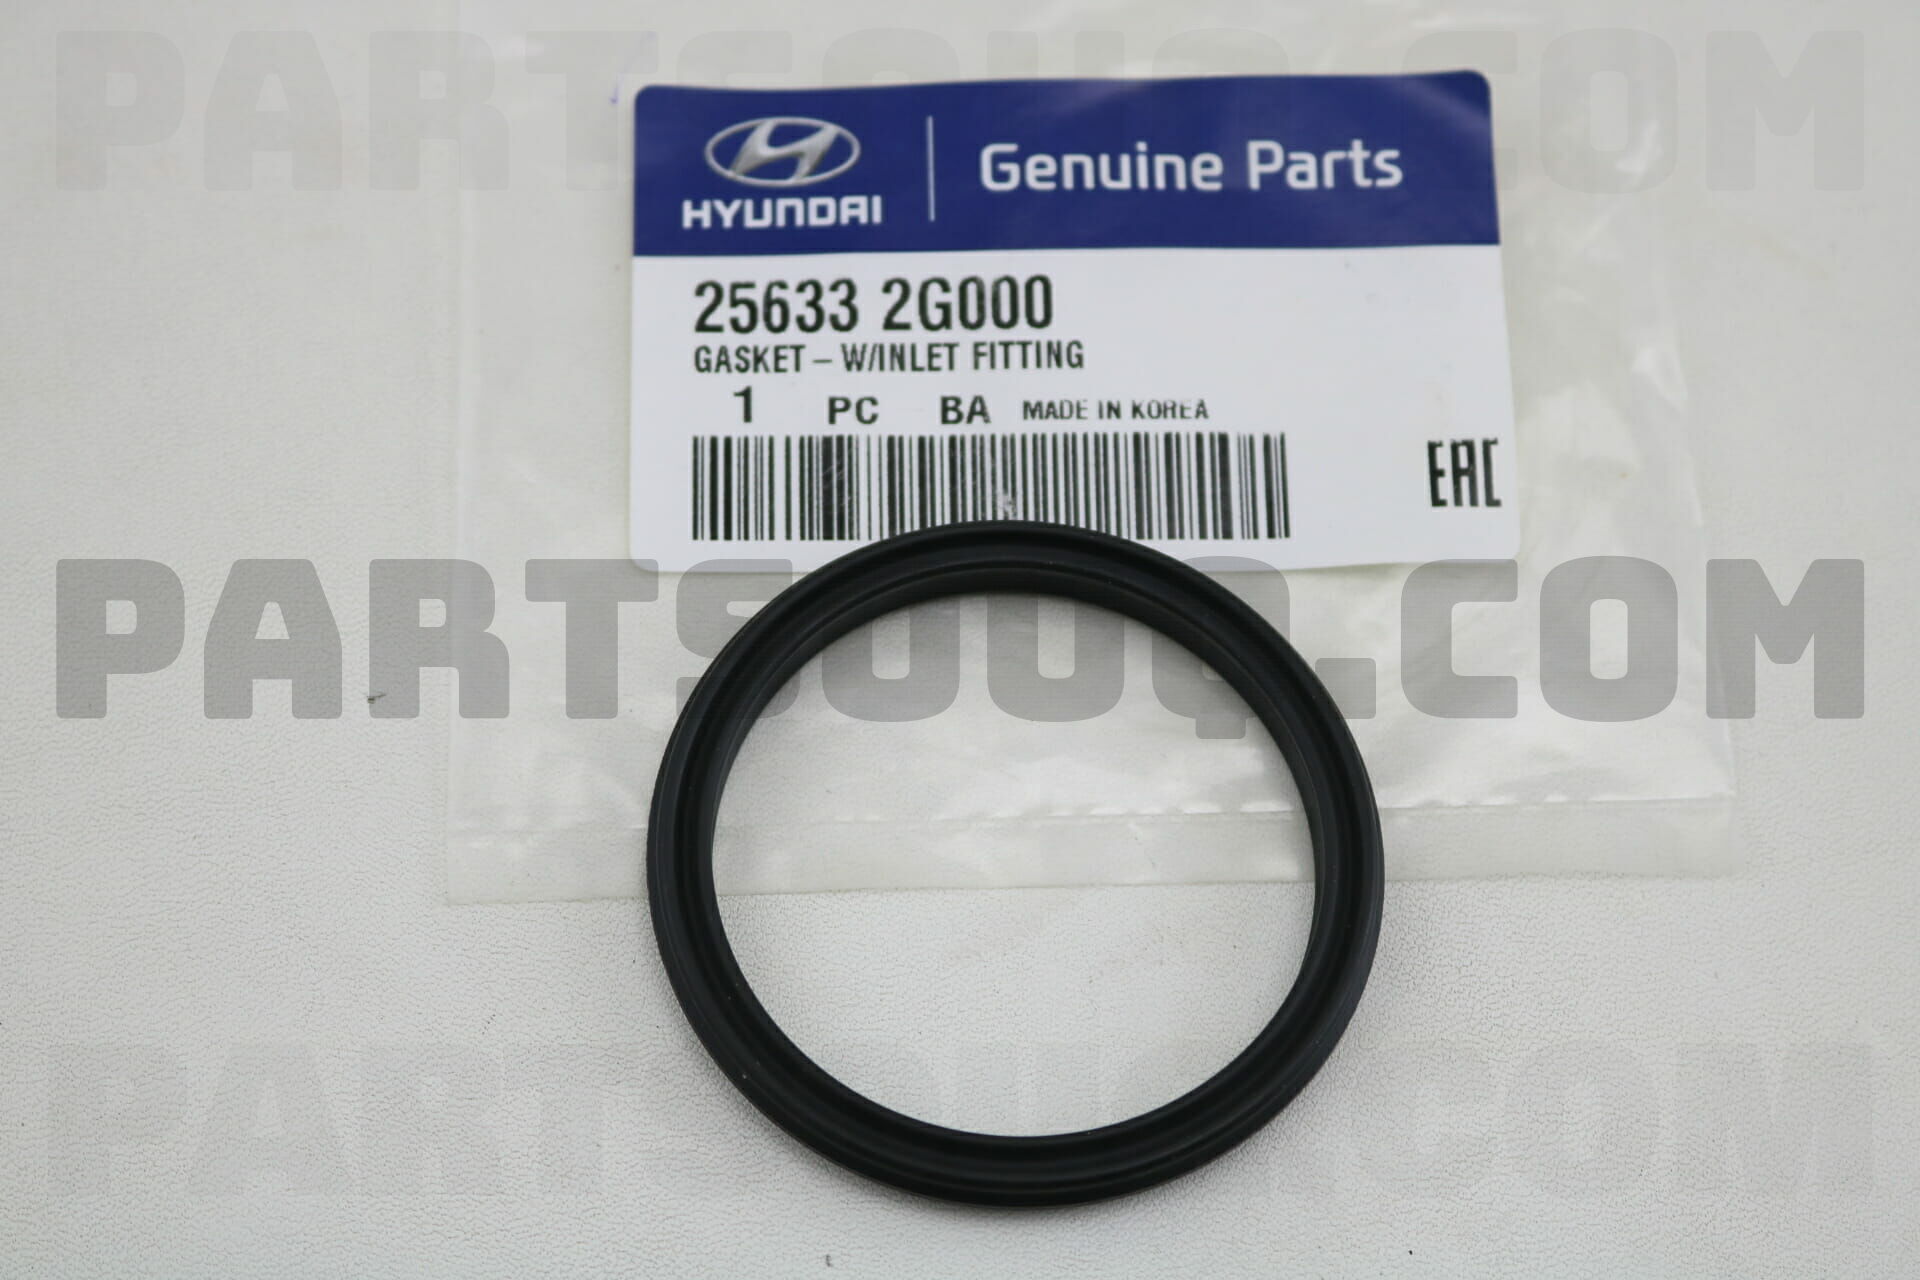 Genuine Engine Coolant Thermostat Seal O-ring Gasket OEM For KIA 256332G000